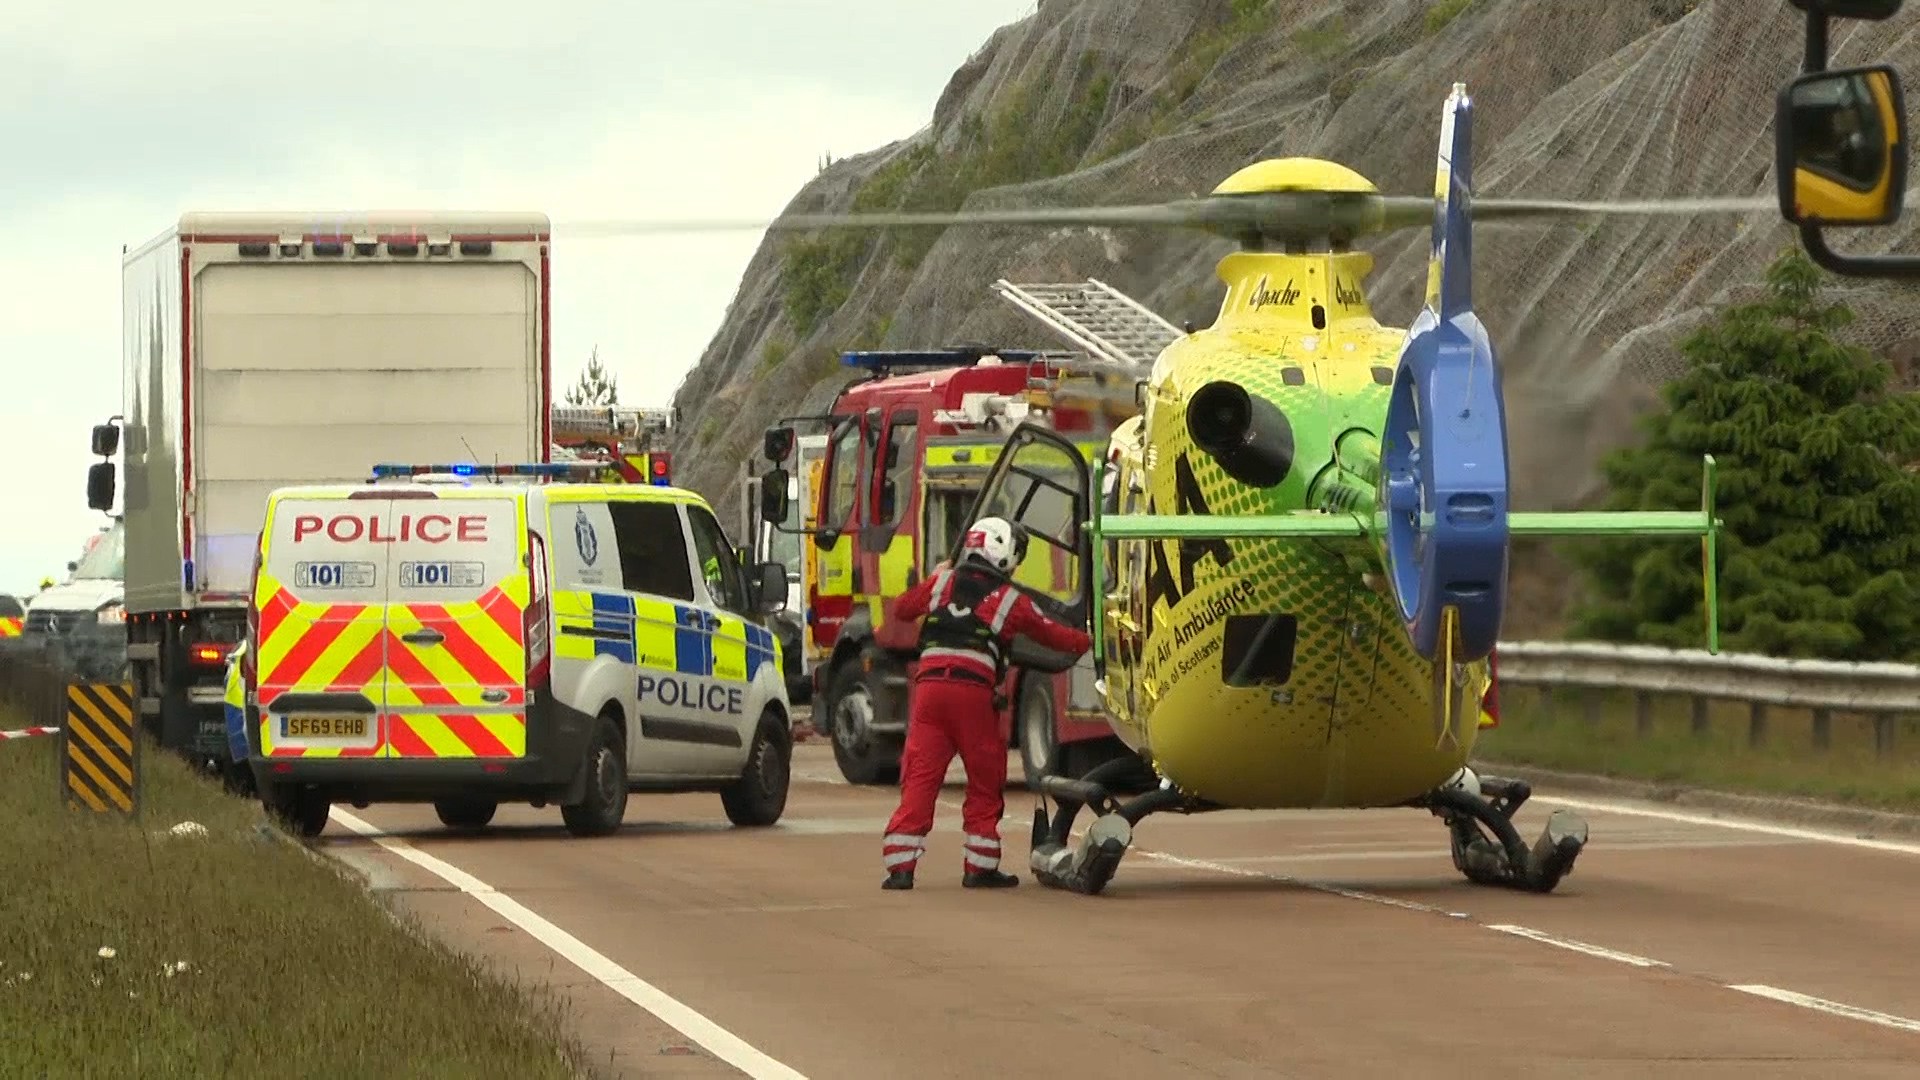 The charity currently operates two helicopters, both EC135-T2is, from their bases in Perth and Aberdeen.